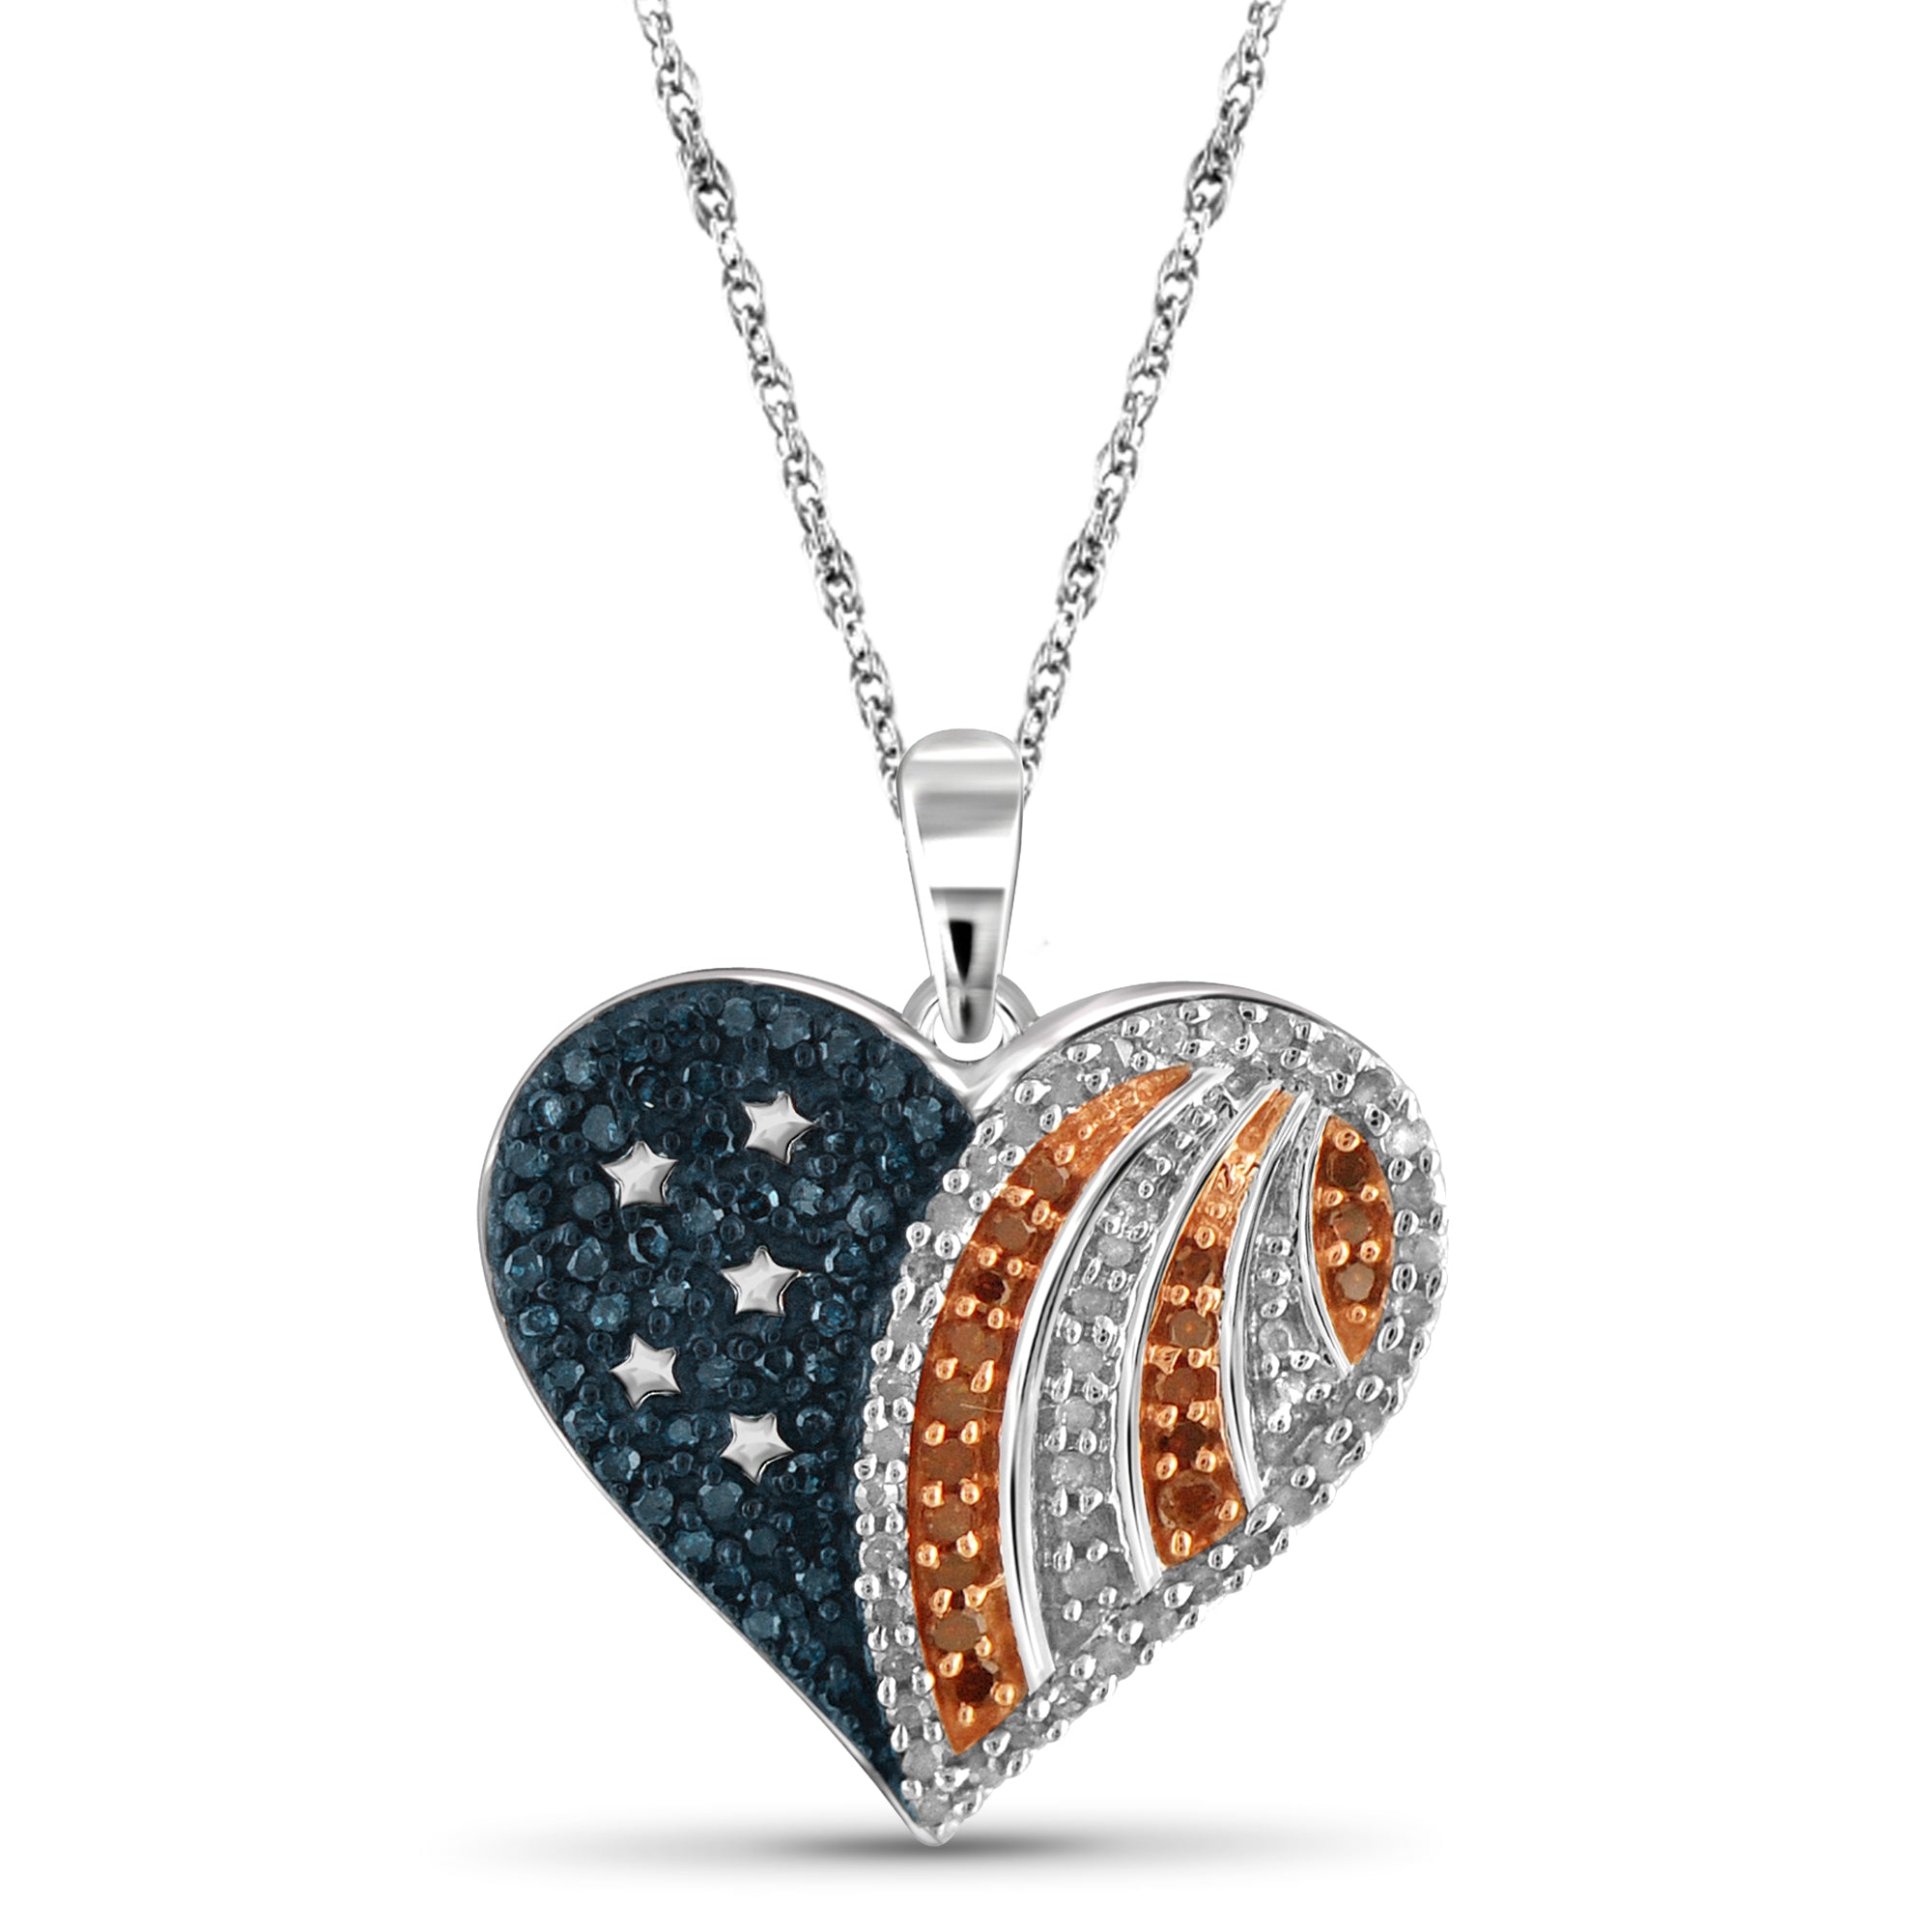 Diamond American Flag Necklace – Stars and Stripes Heart Pendant